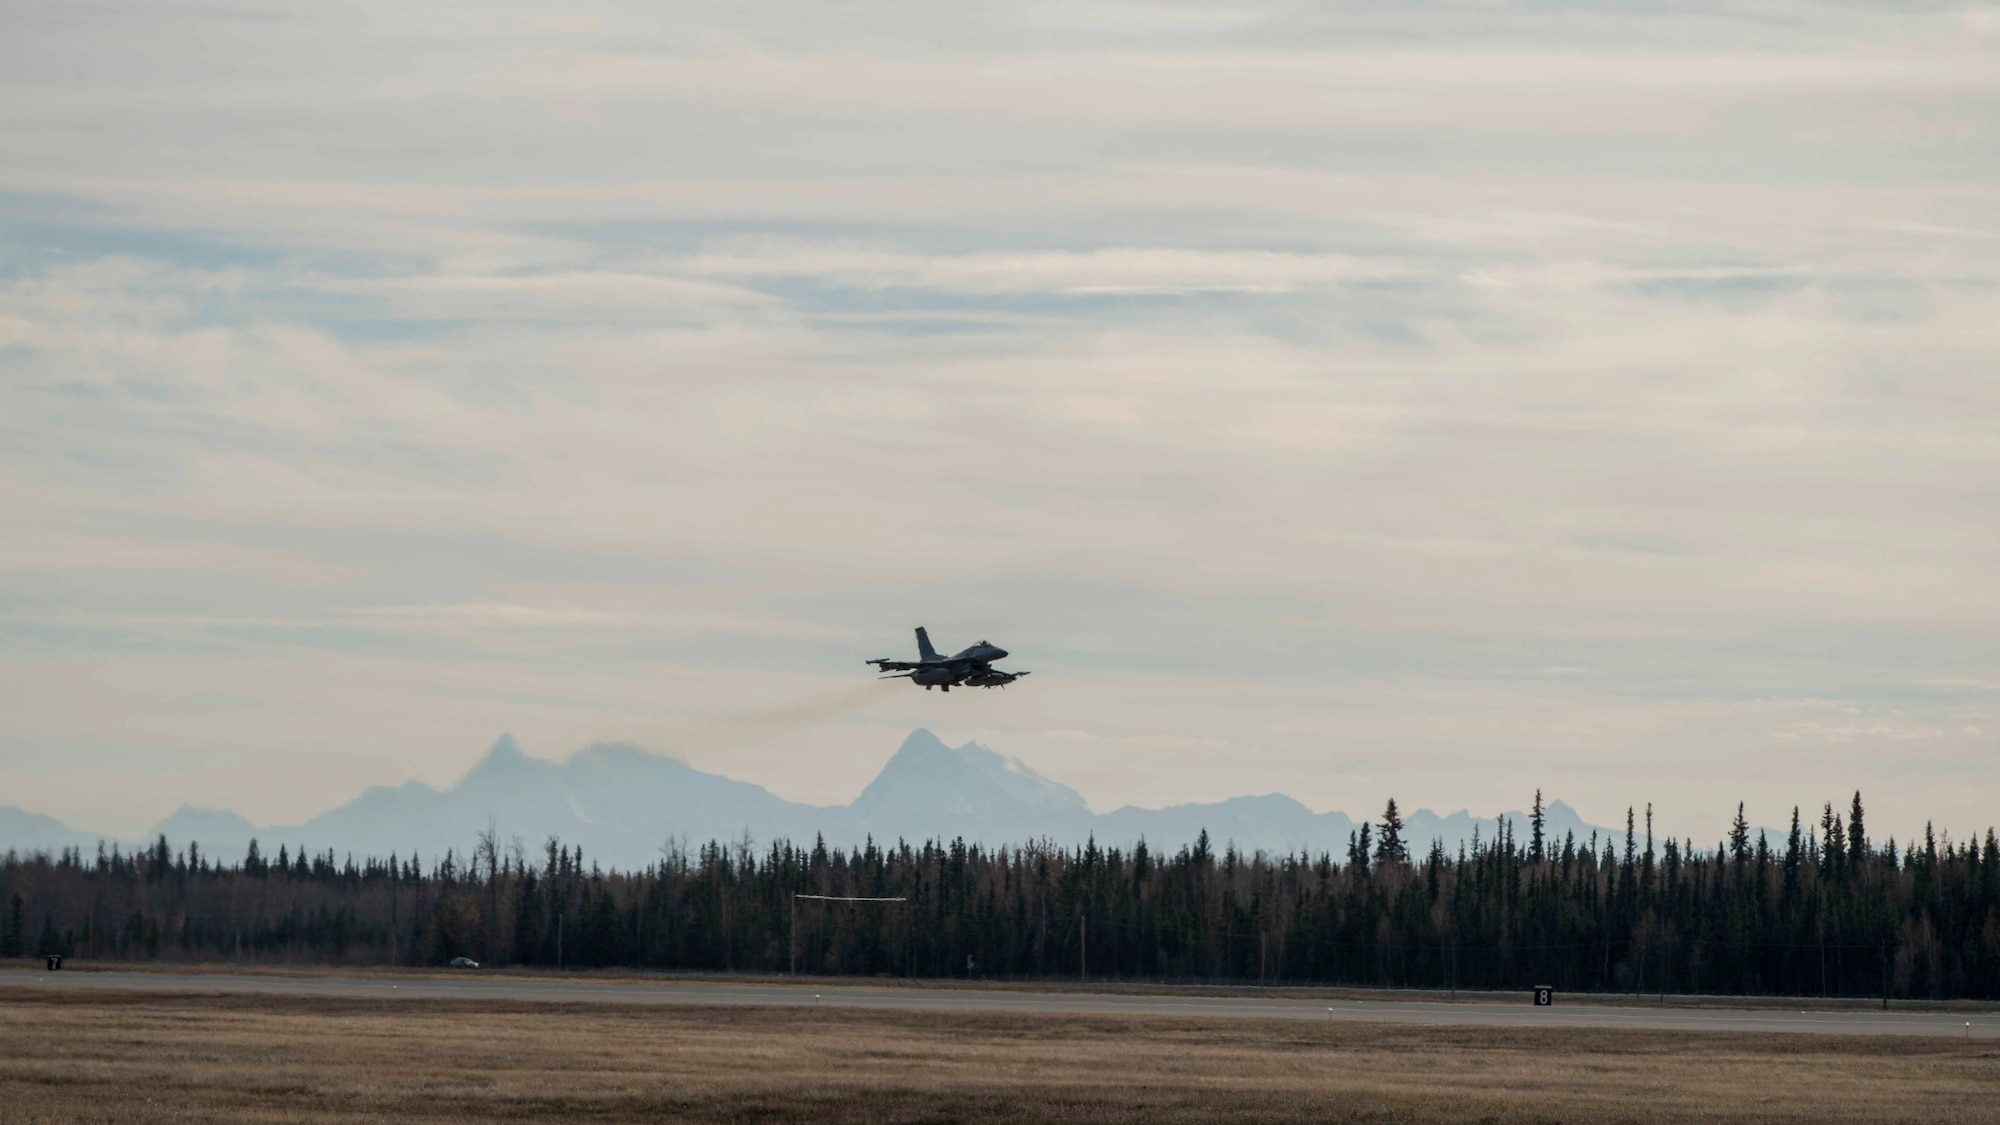 A U.S. Air Force F-16 Fighting Falcon takes flight during exercise Red Flag-Alaska 19-1, at Eielson Air Force Base, Alaska, Oct. 9, 2018. During the exercise, Misawa Air Base maintainers work diligently to inspect and repair multiple jets prior to take-off in order to enhance pilot safety. (U.S. Air Force photo by Airman 1st Class Collette Brooks)